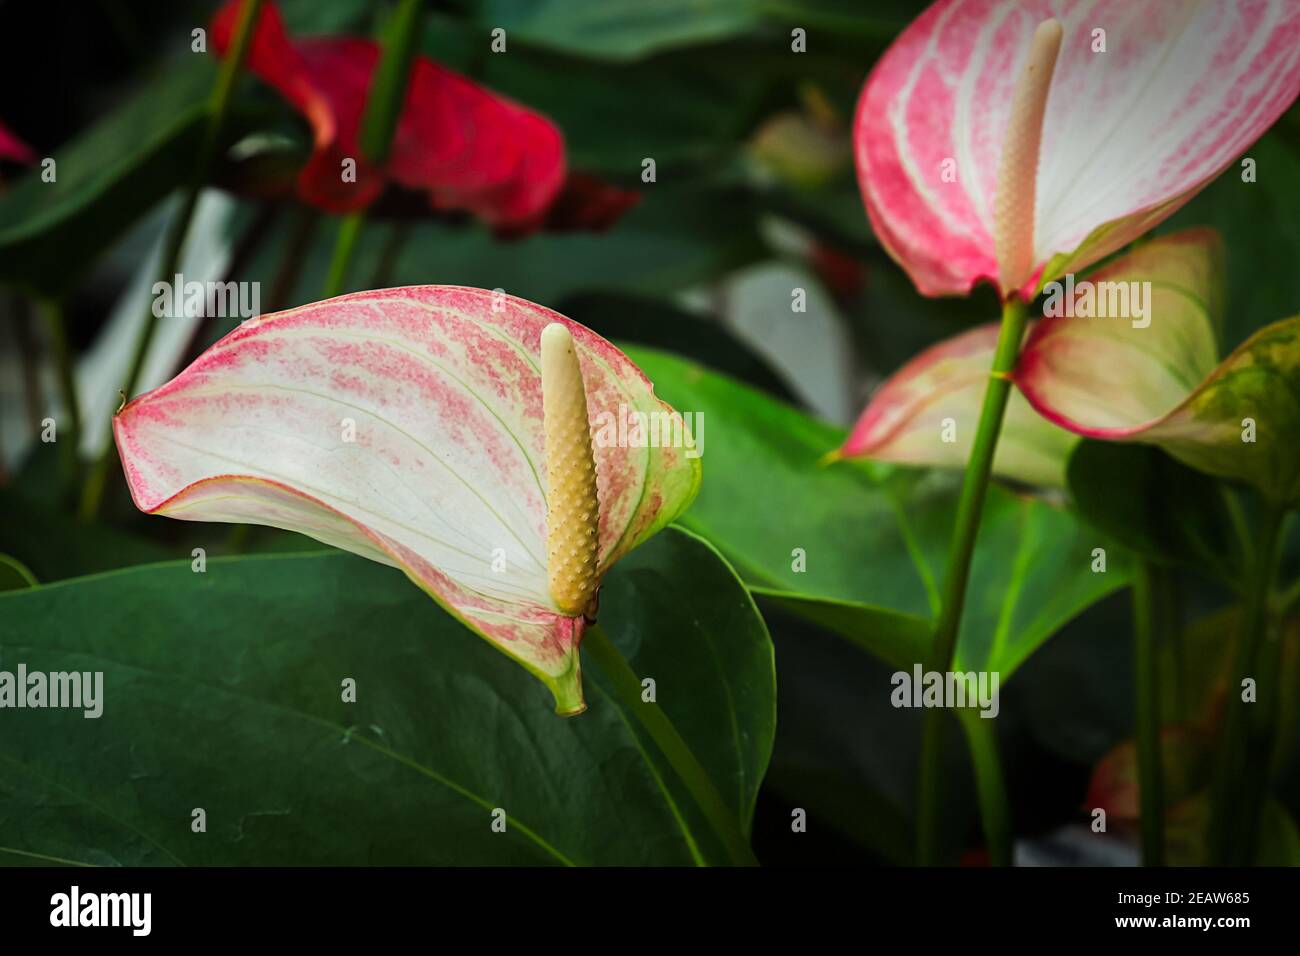 Side view of white spadix on a laceleaf plant Stock Photo